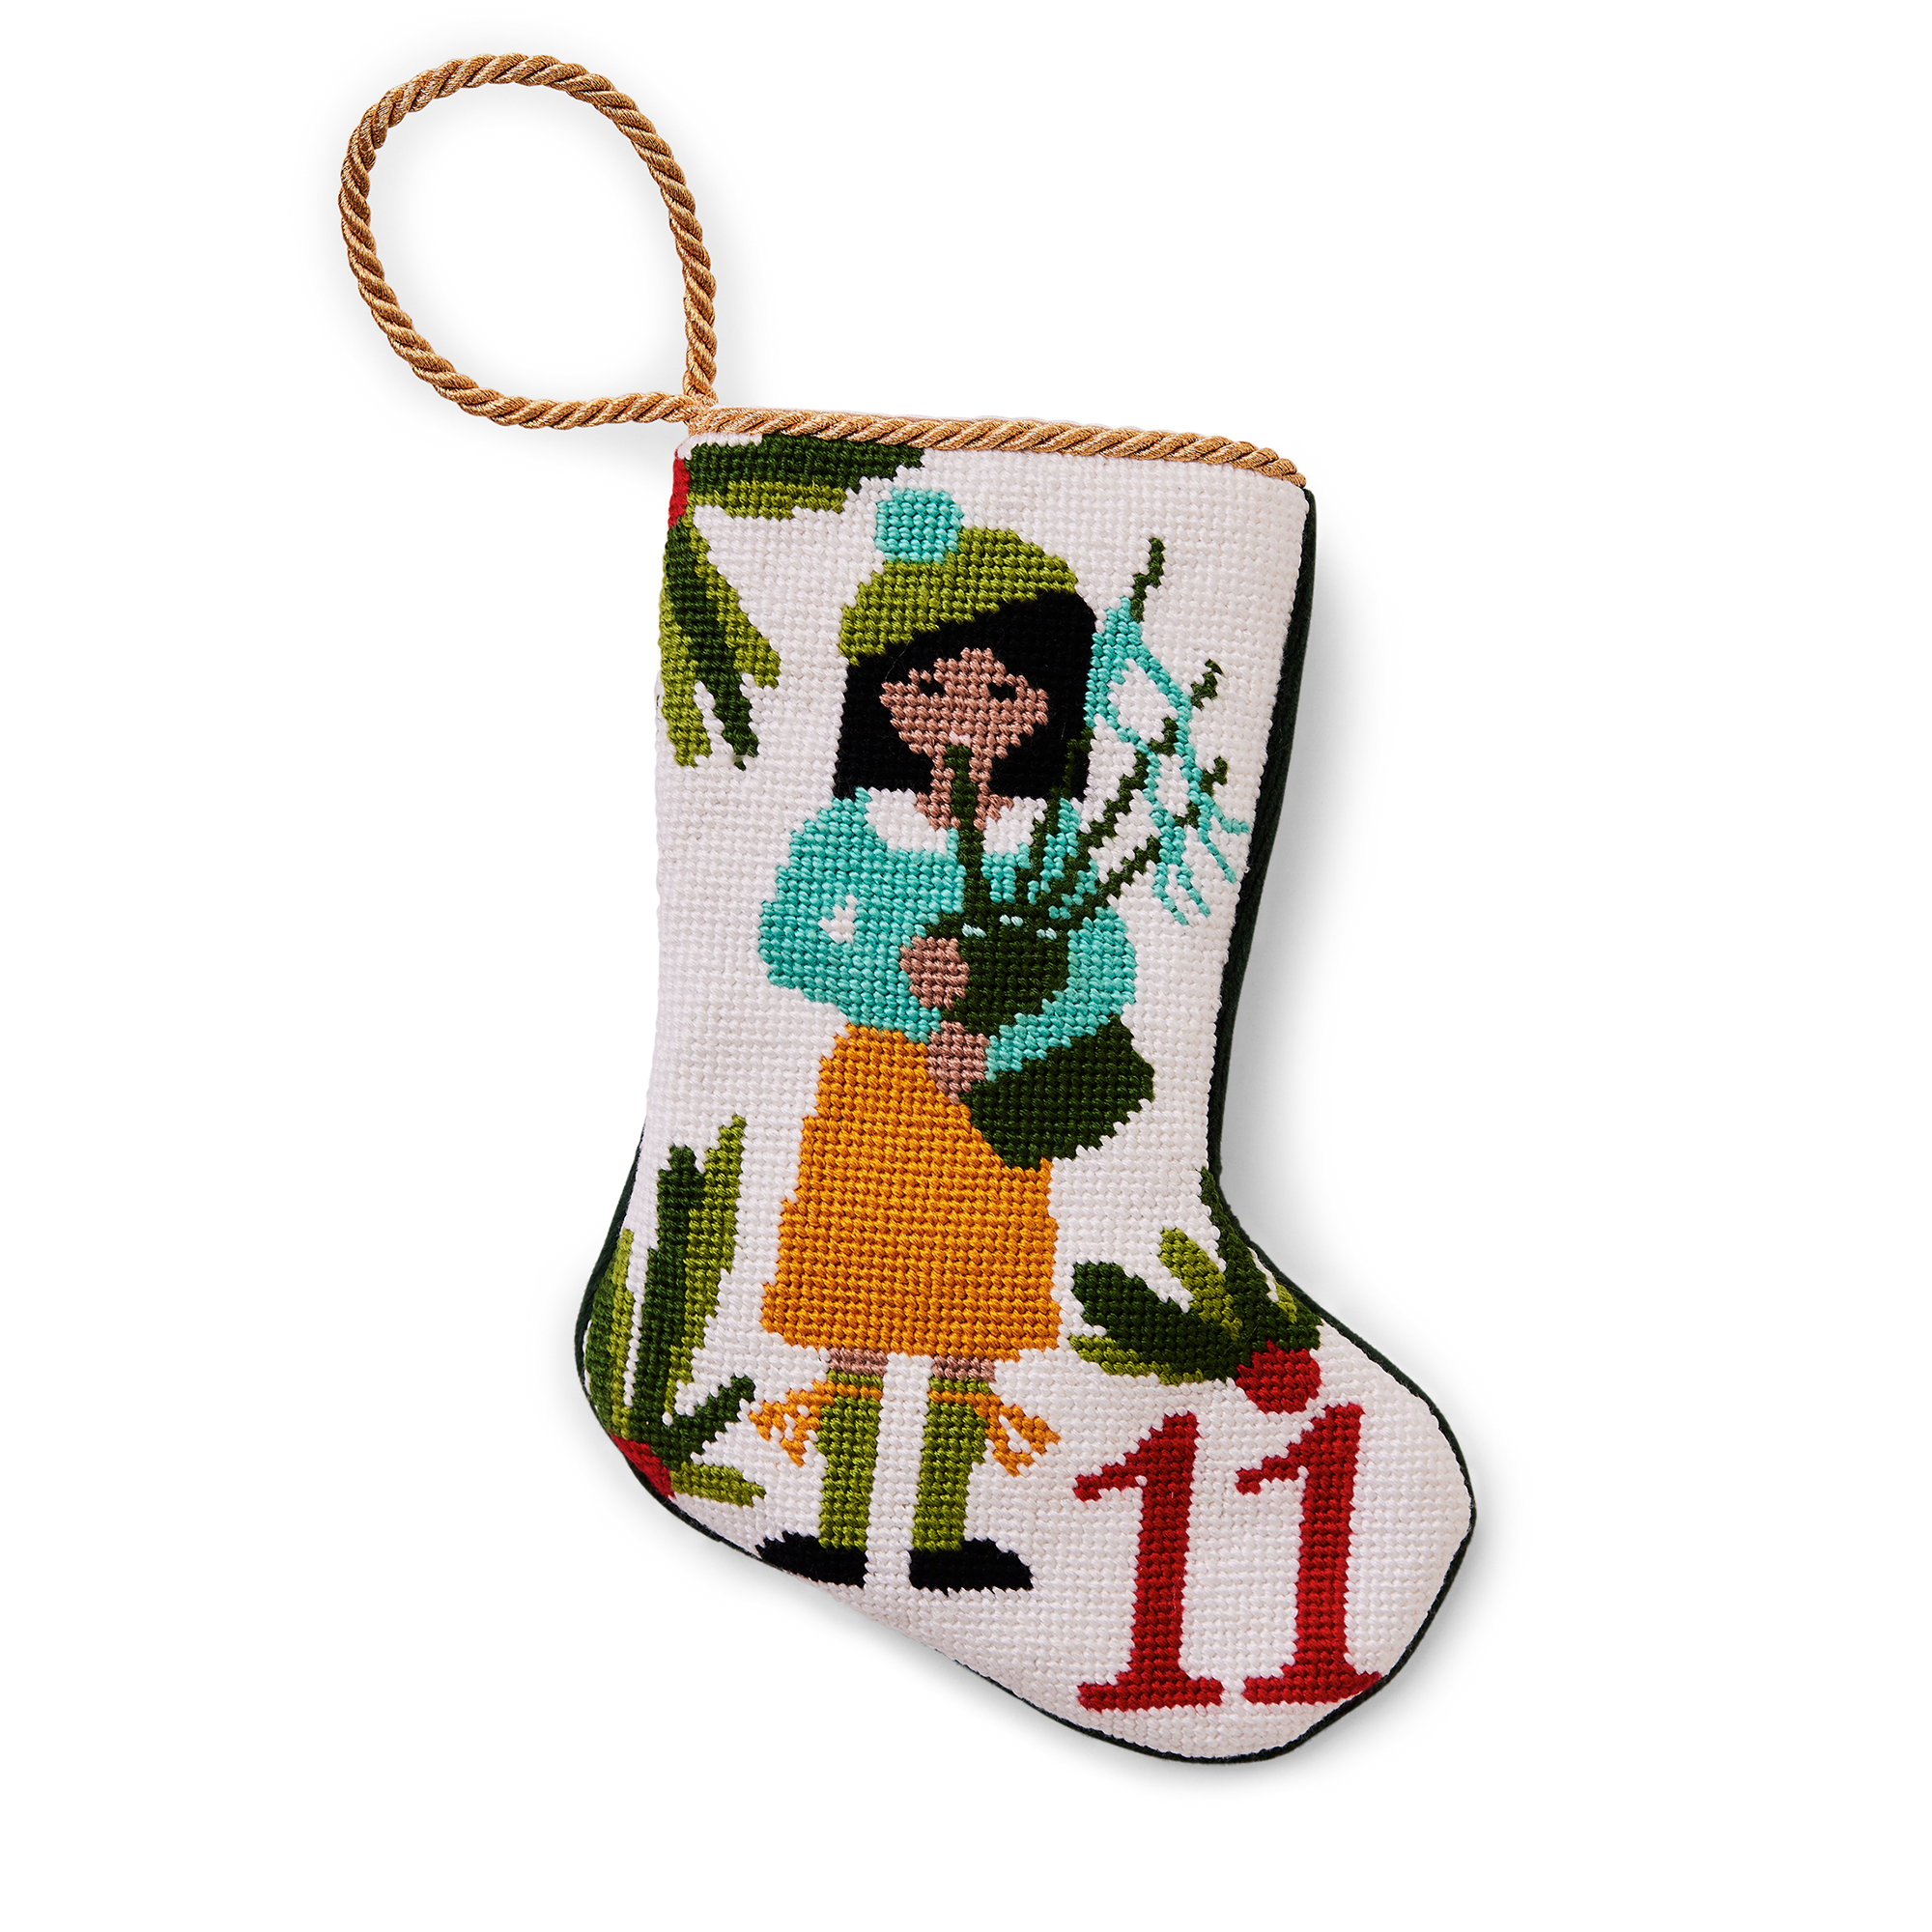 An intricately designed mini needlepoint stocking featuring the '11 Pipers Piping' from the classic Christmas carol. This festive decoration adds a traditional and charming touch to your holiday decor. Perfect as tree ornaments, place settings, or for holding special gifts.